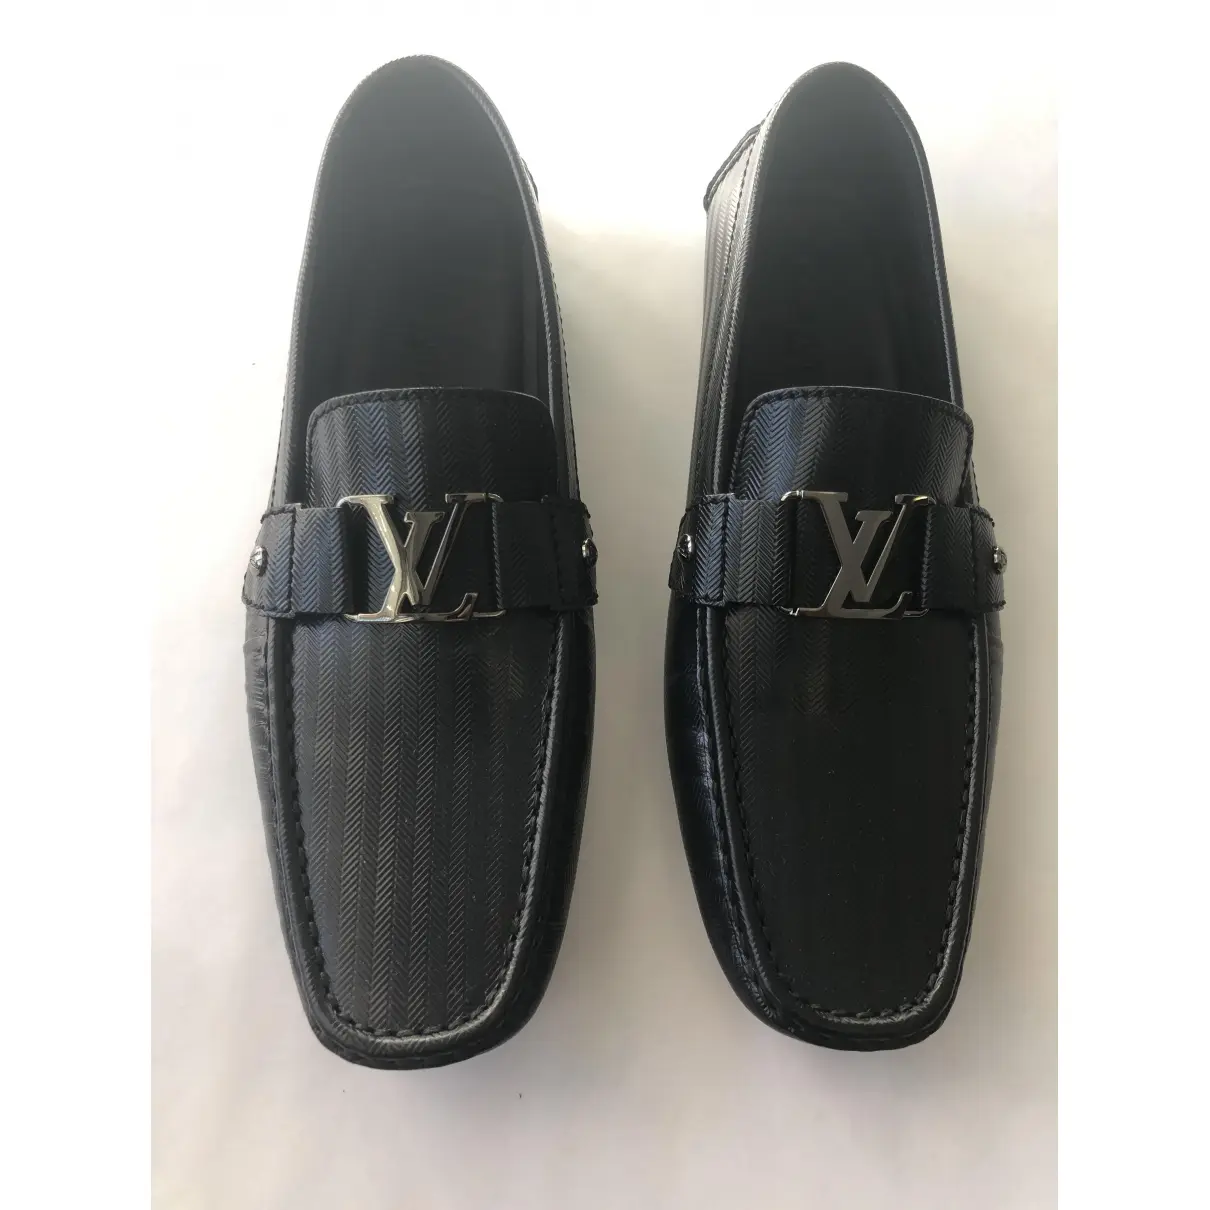 Louis Vuitton Monte Carlo leather flats for sale